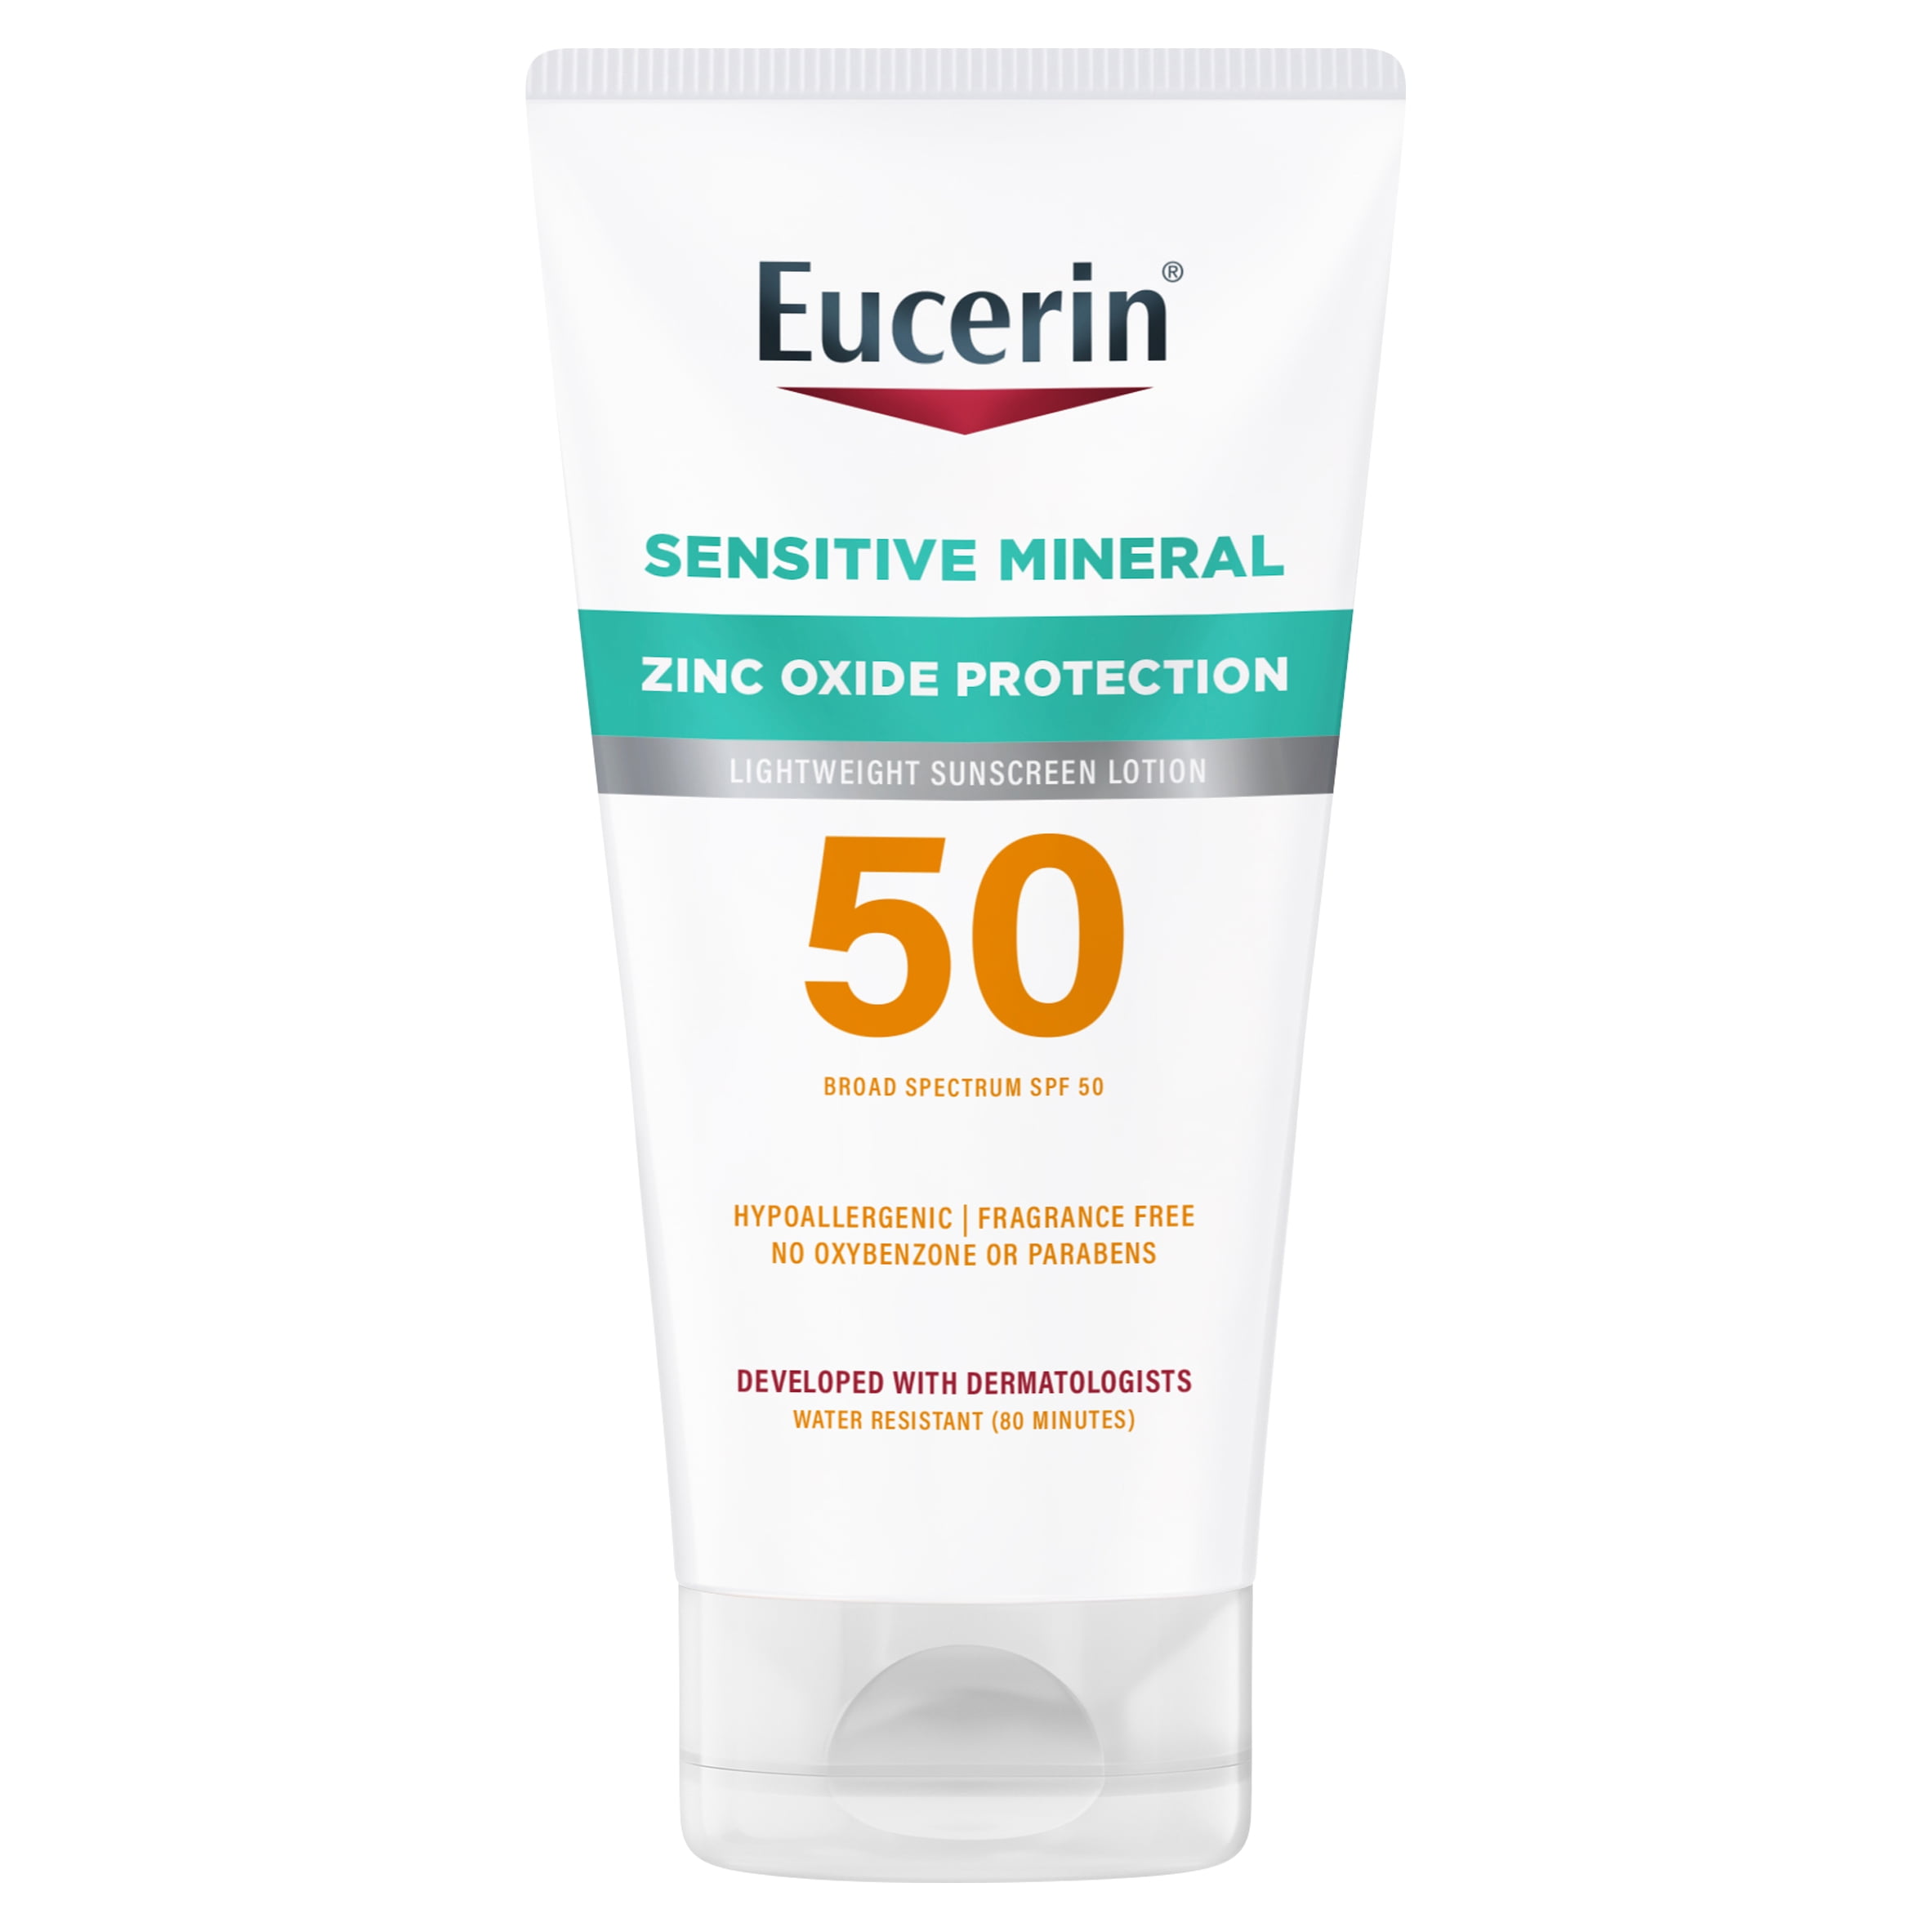 EUCERIN Oil Control Lightweight Sunscreen Lotion for Face SPF 50 - Ngbeauty